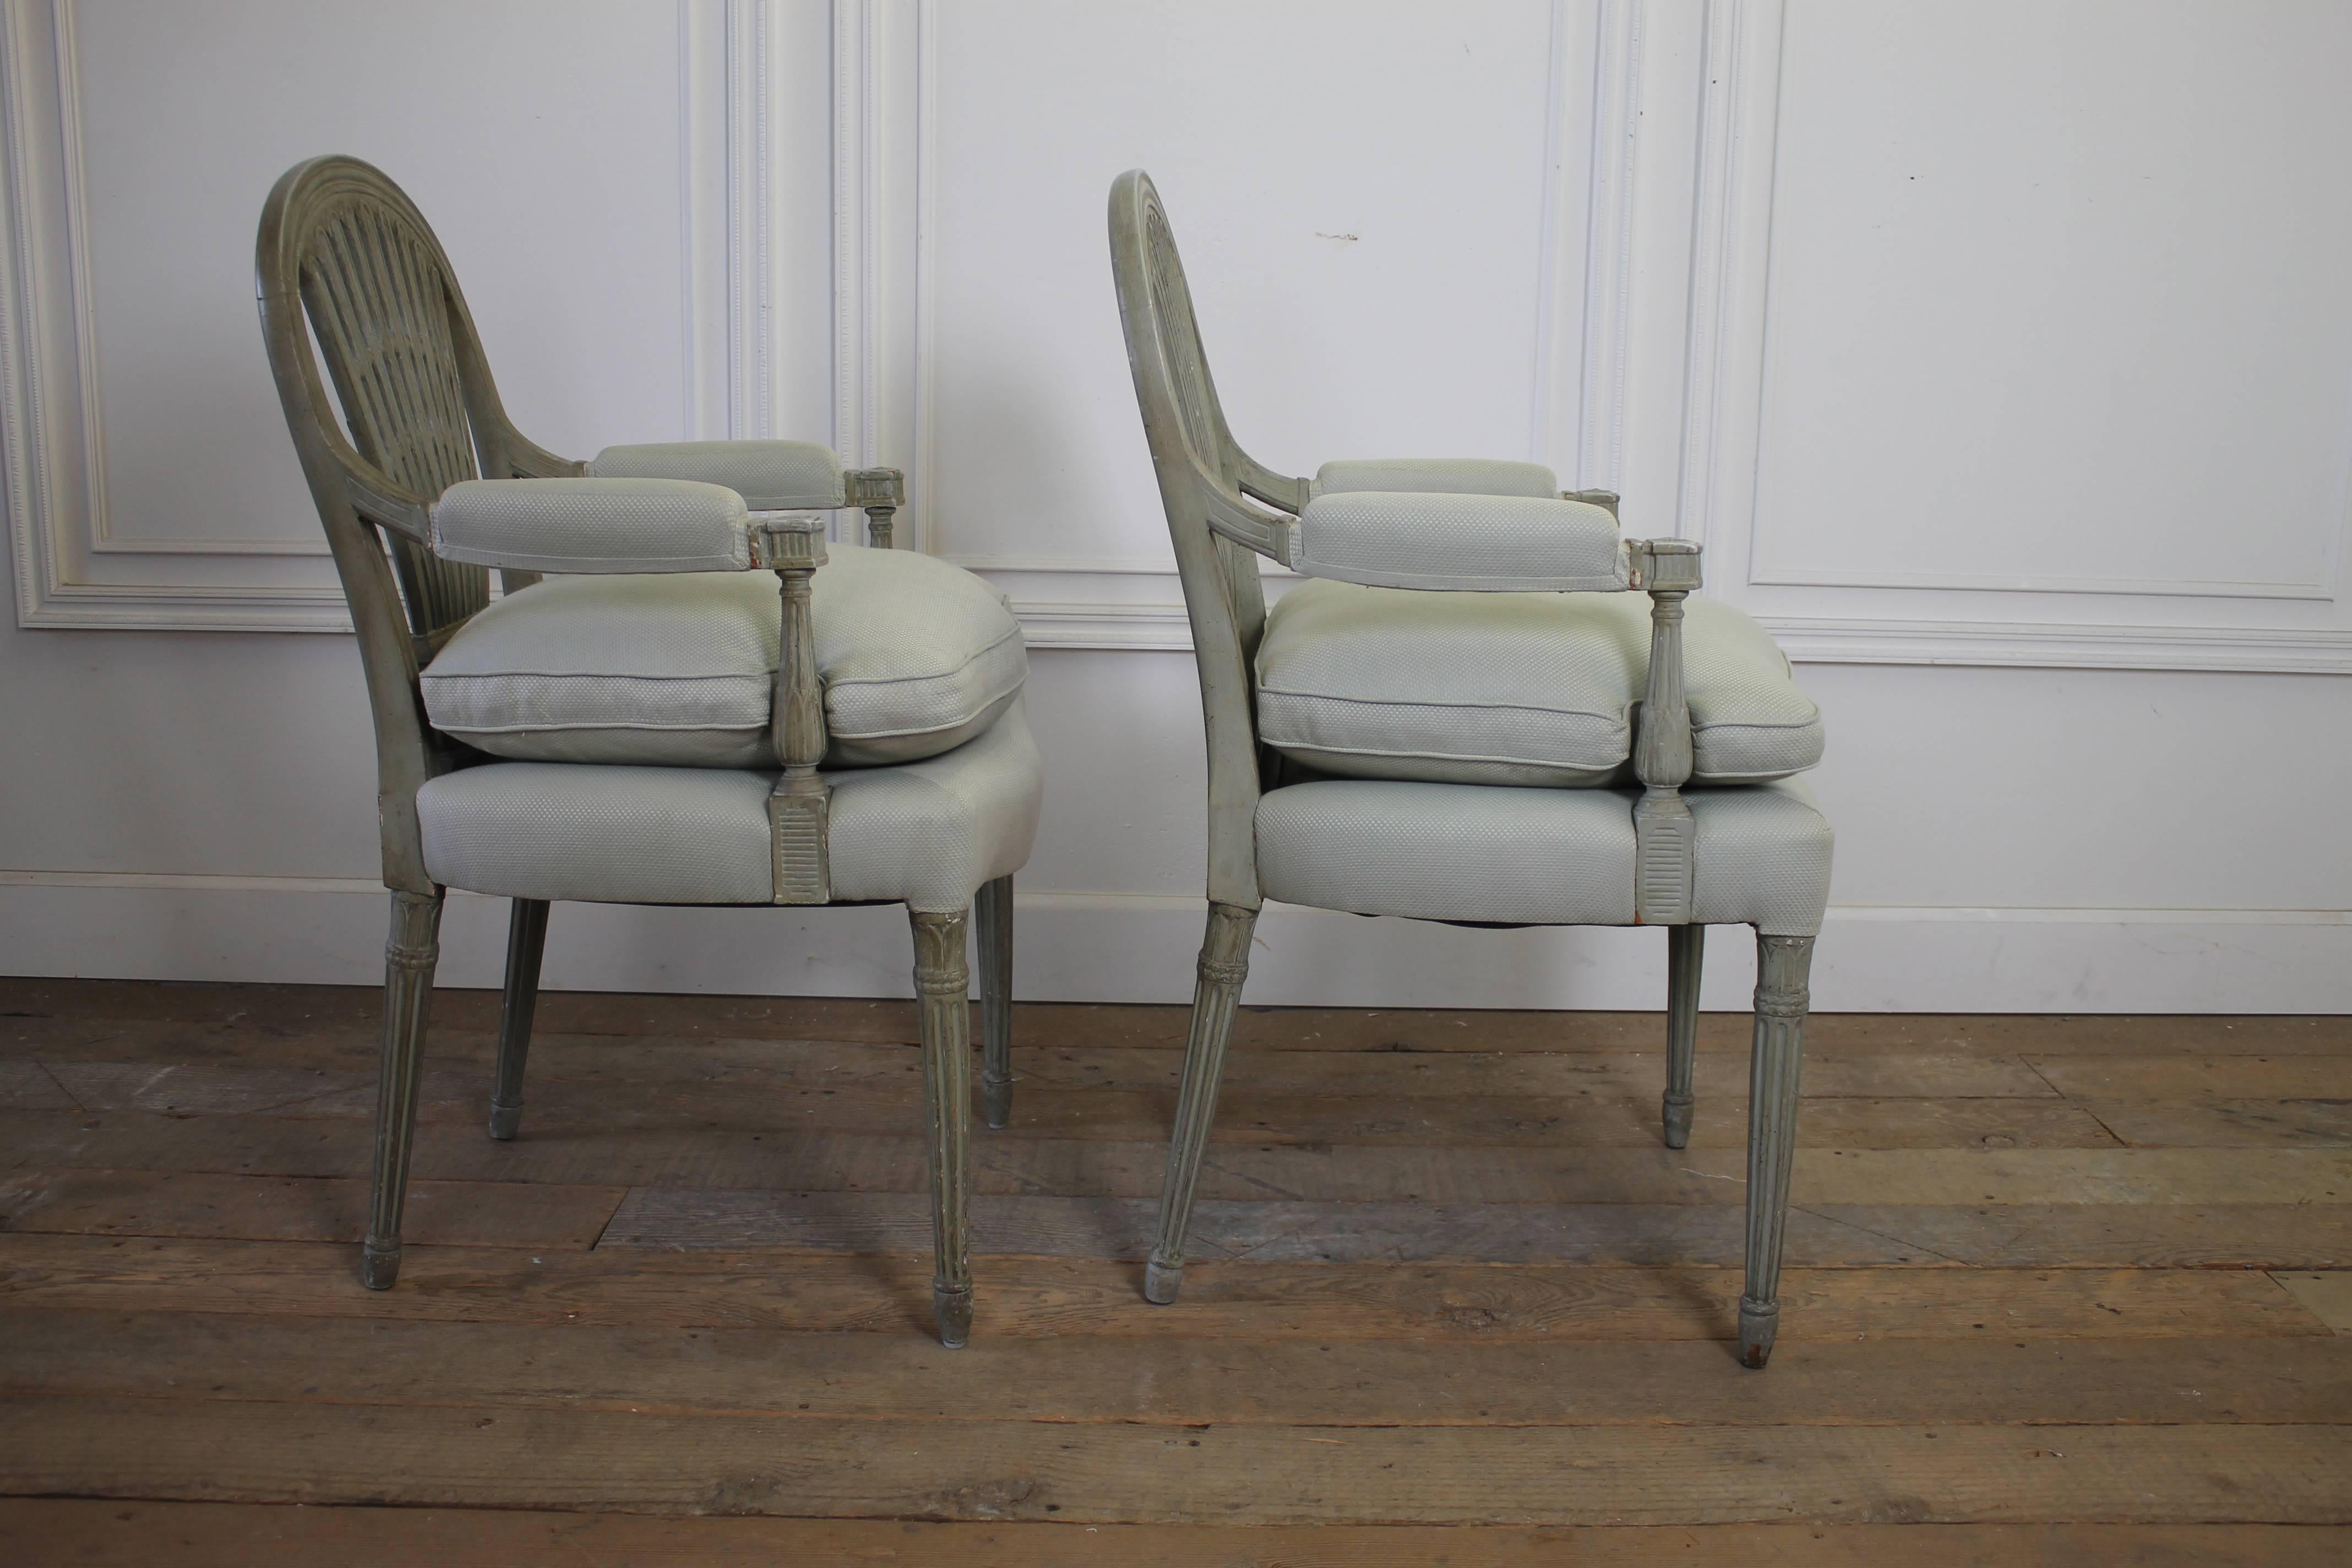 Upholstery Early 19th Century Painted Upholstered Wheatsheaf Style Gustavian Dining Chairs